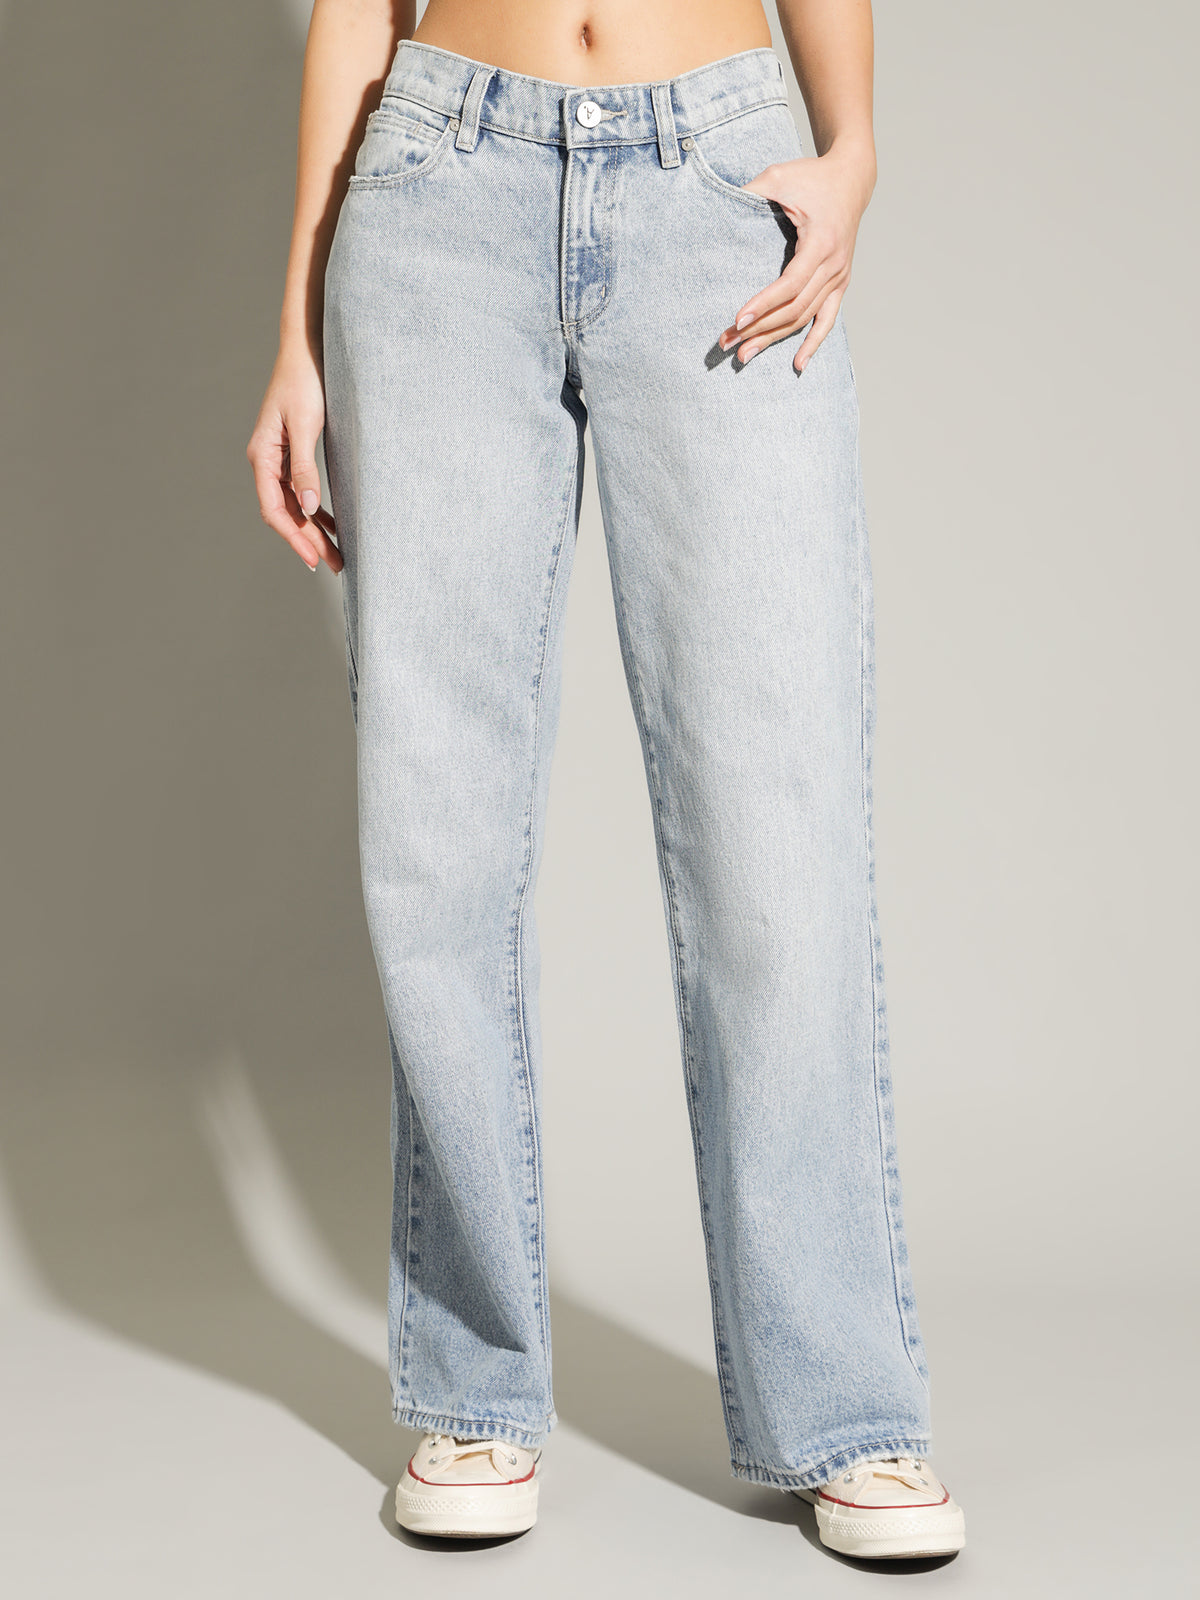 A 99 Low &amp; Wide Jeans in Mischa Organic Blue